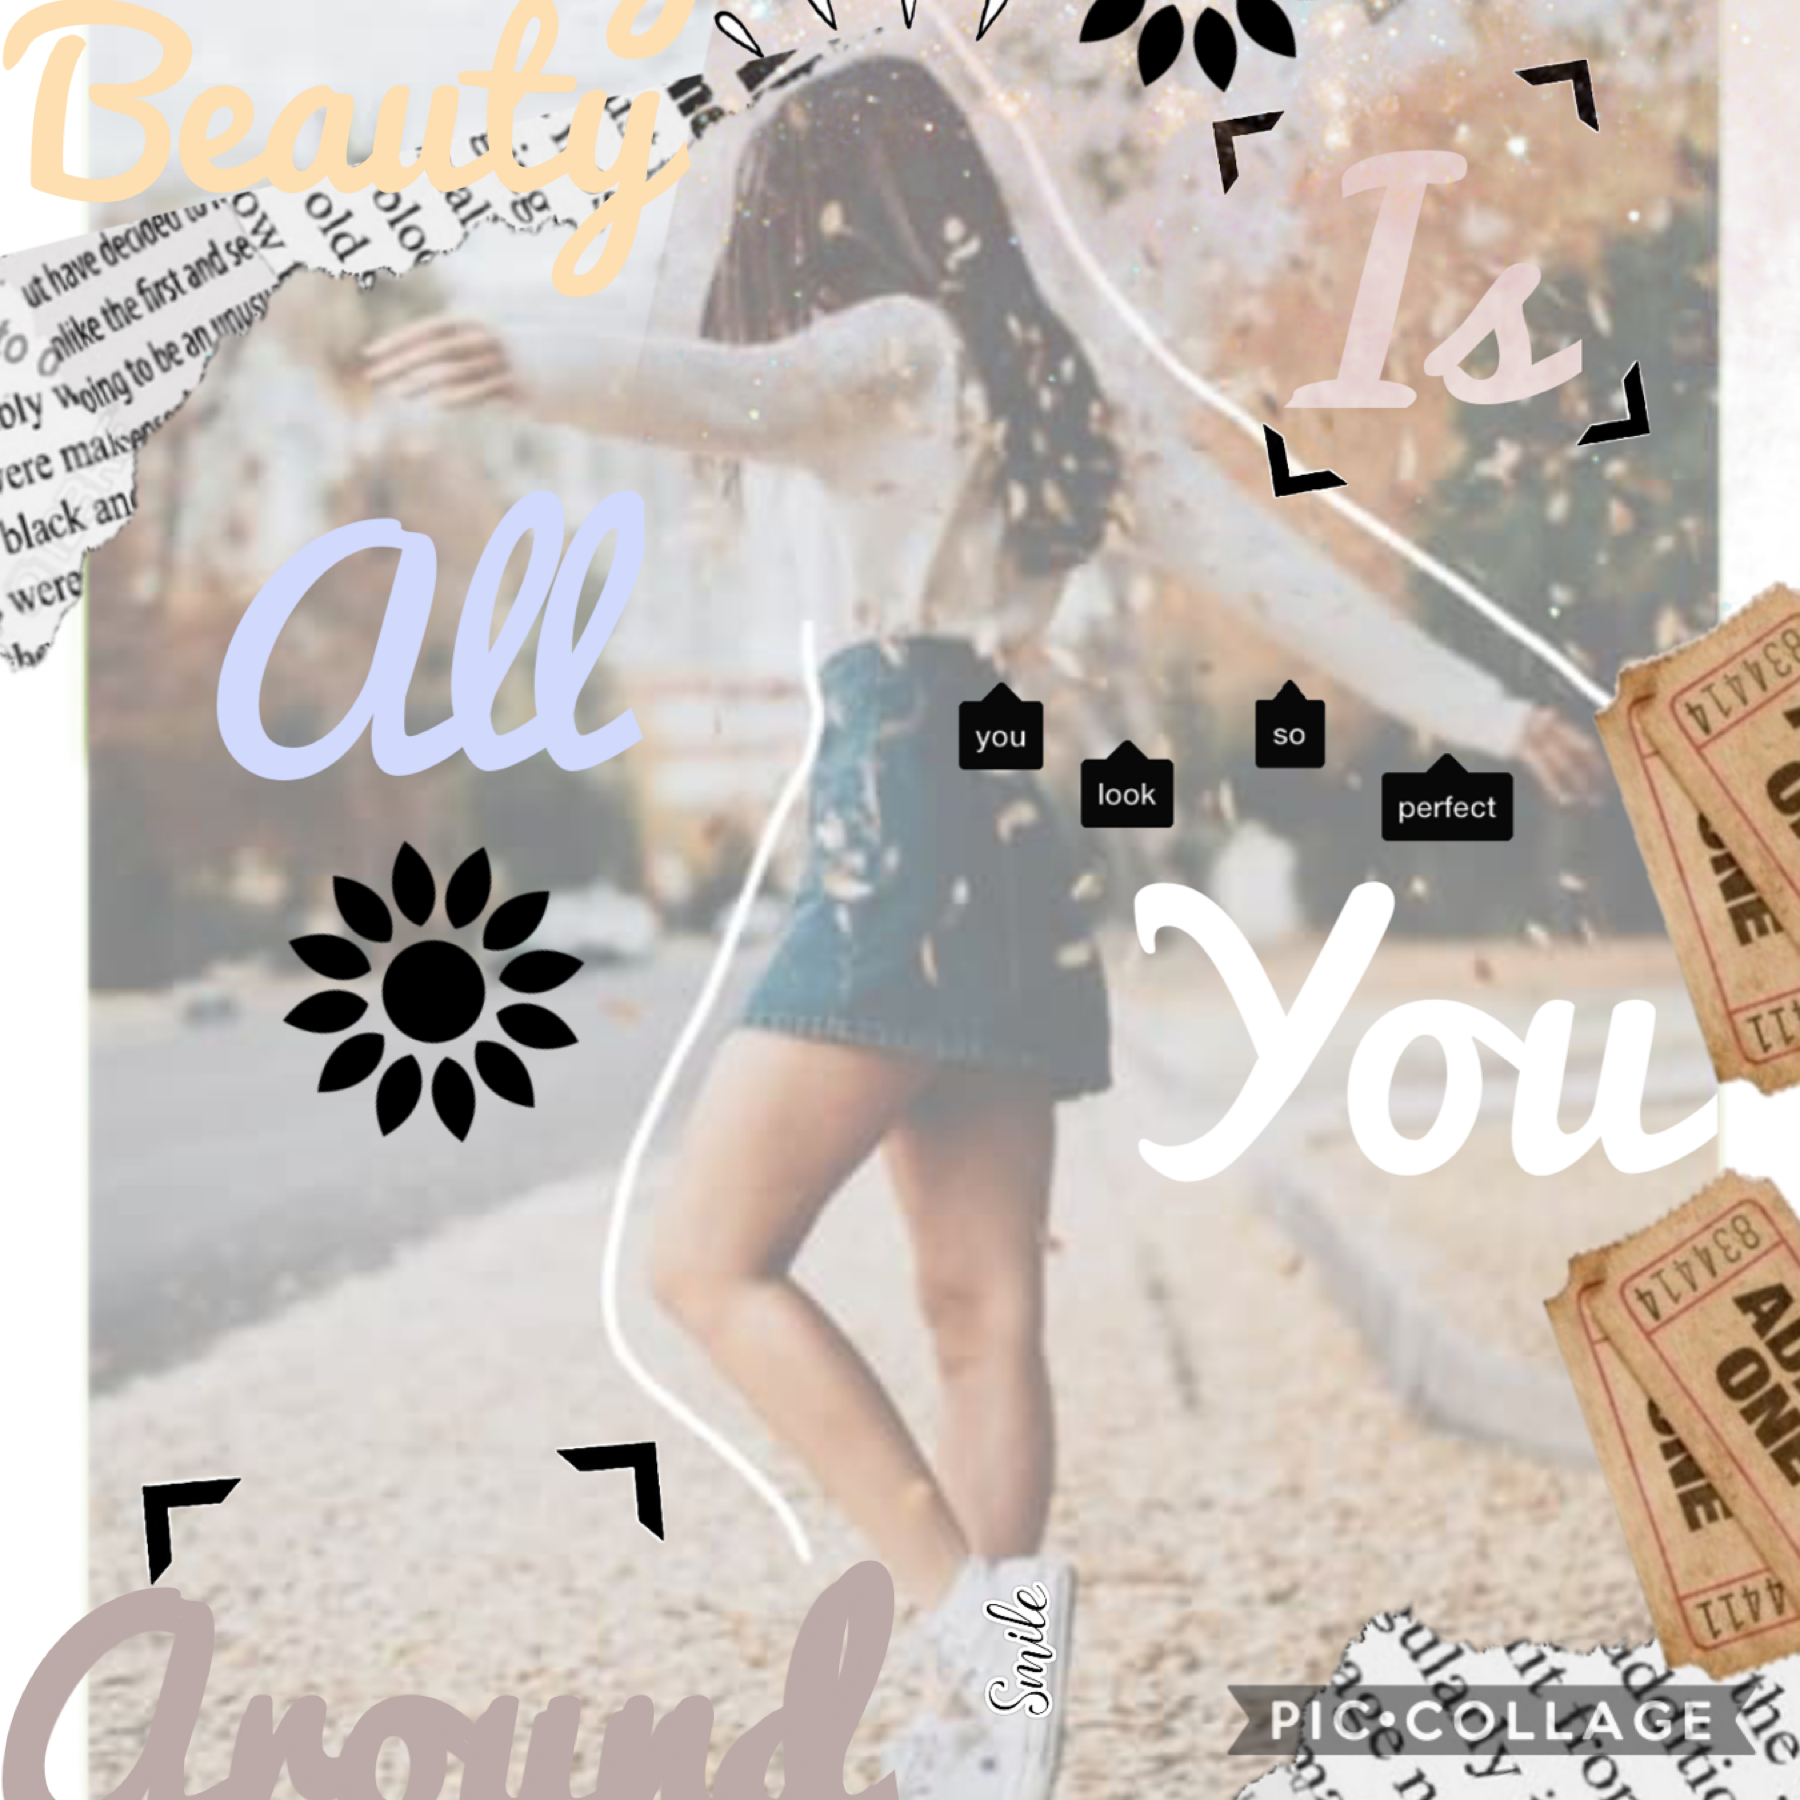 💛Cloe18 and duh_its_brii collab collage💛